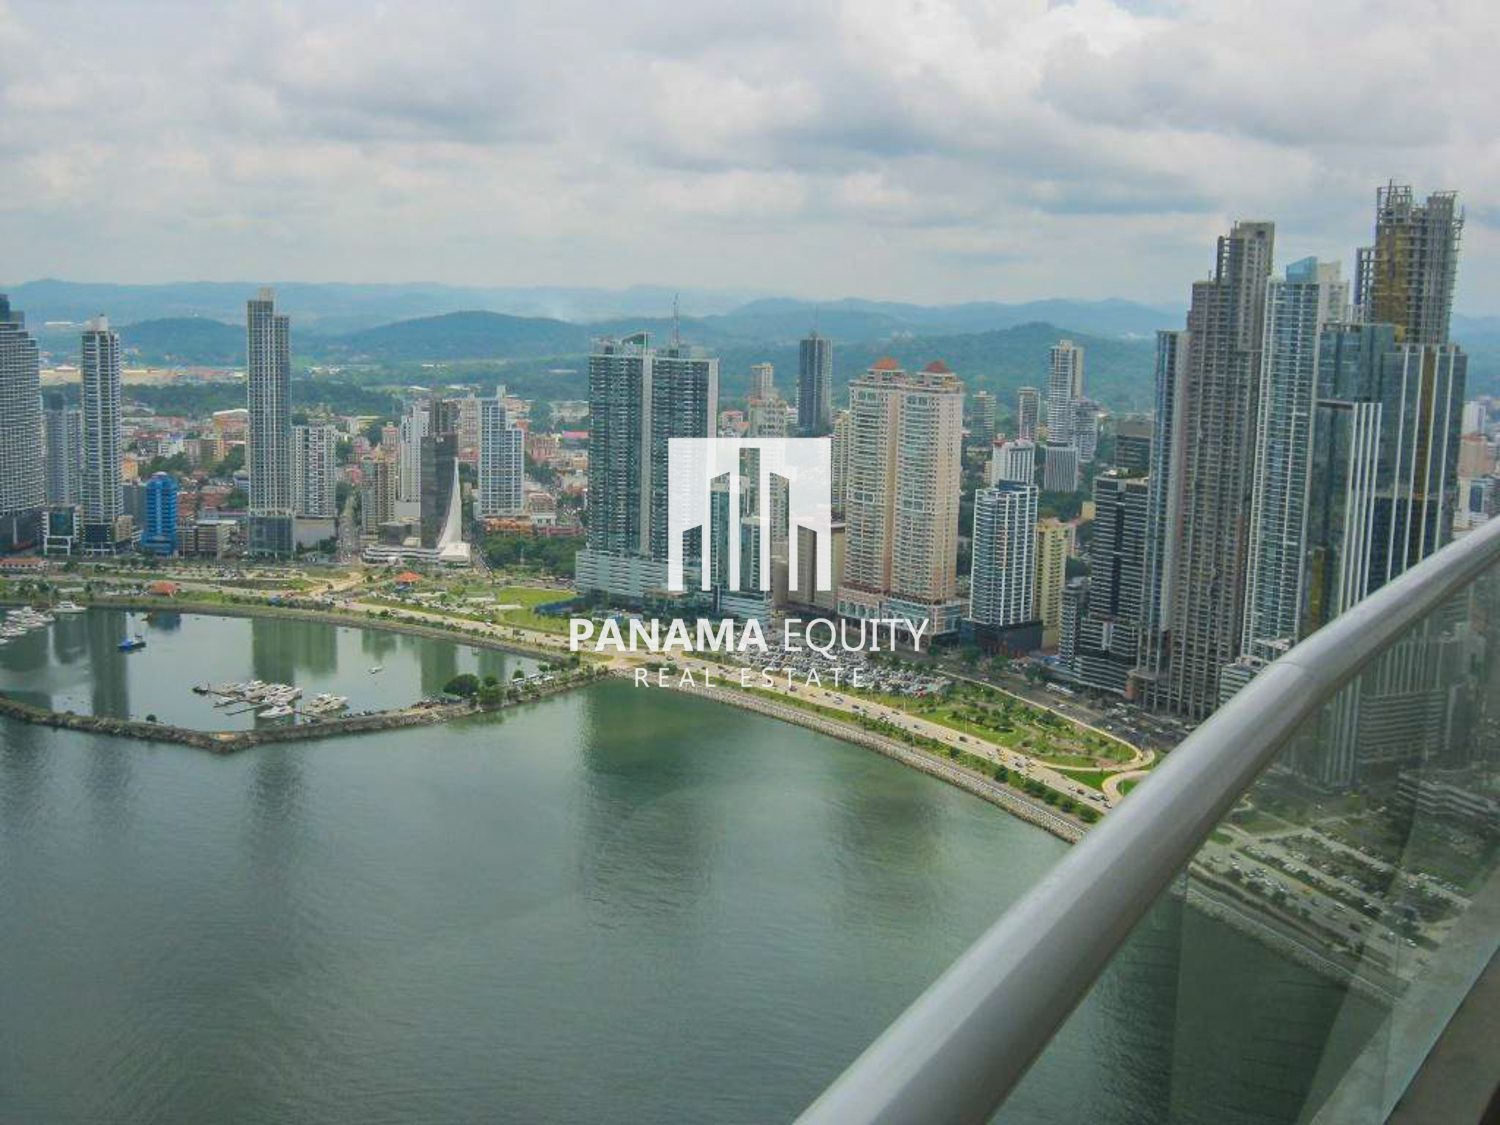 The Point is Panama’s Icon of luxury